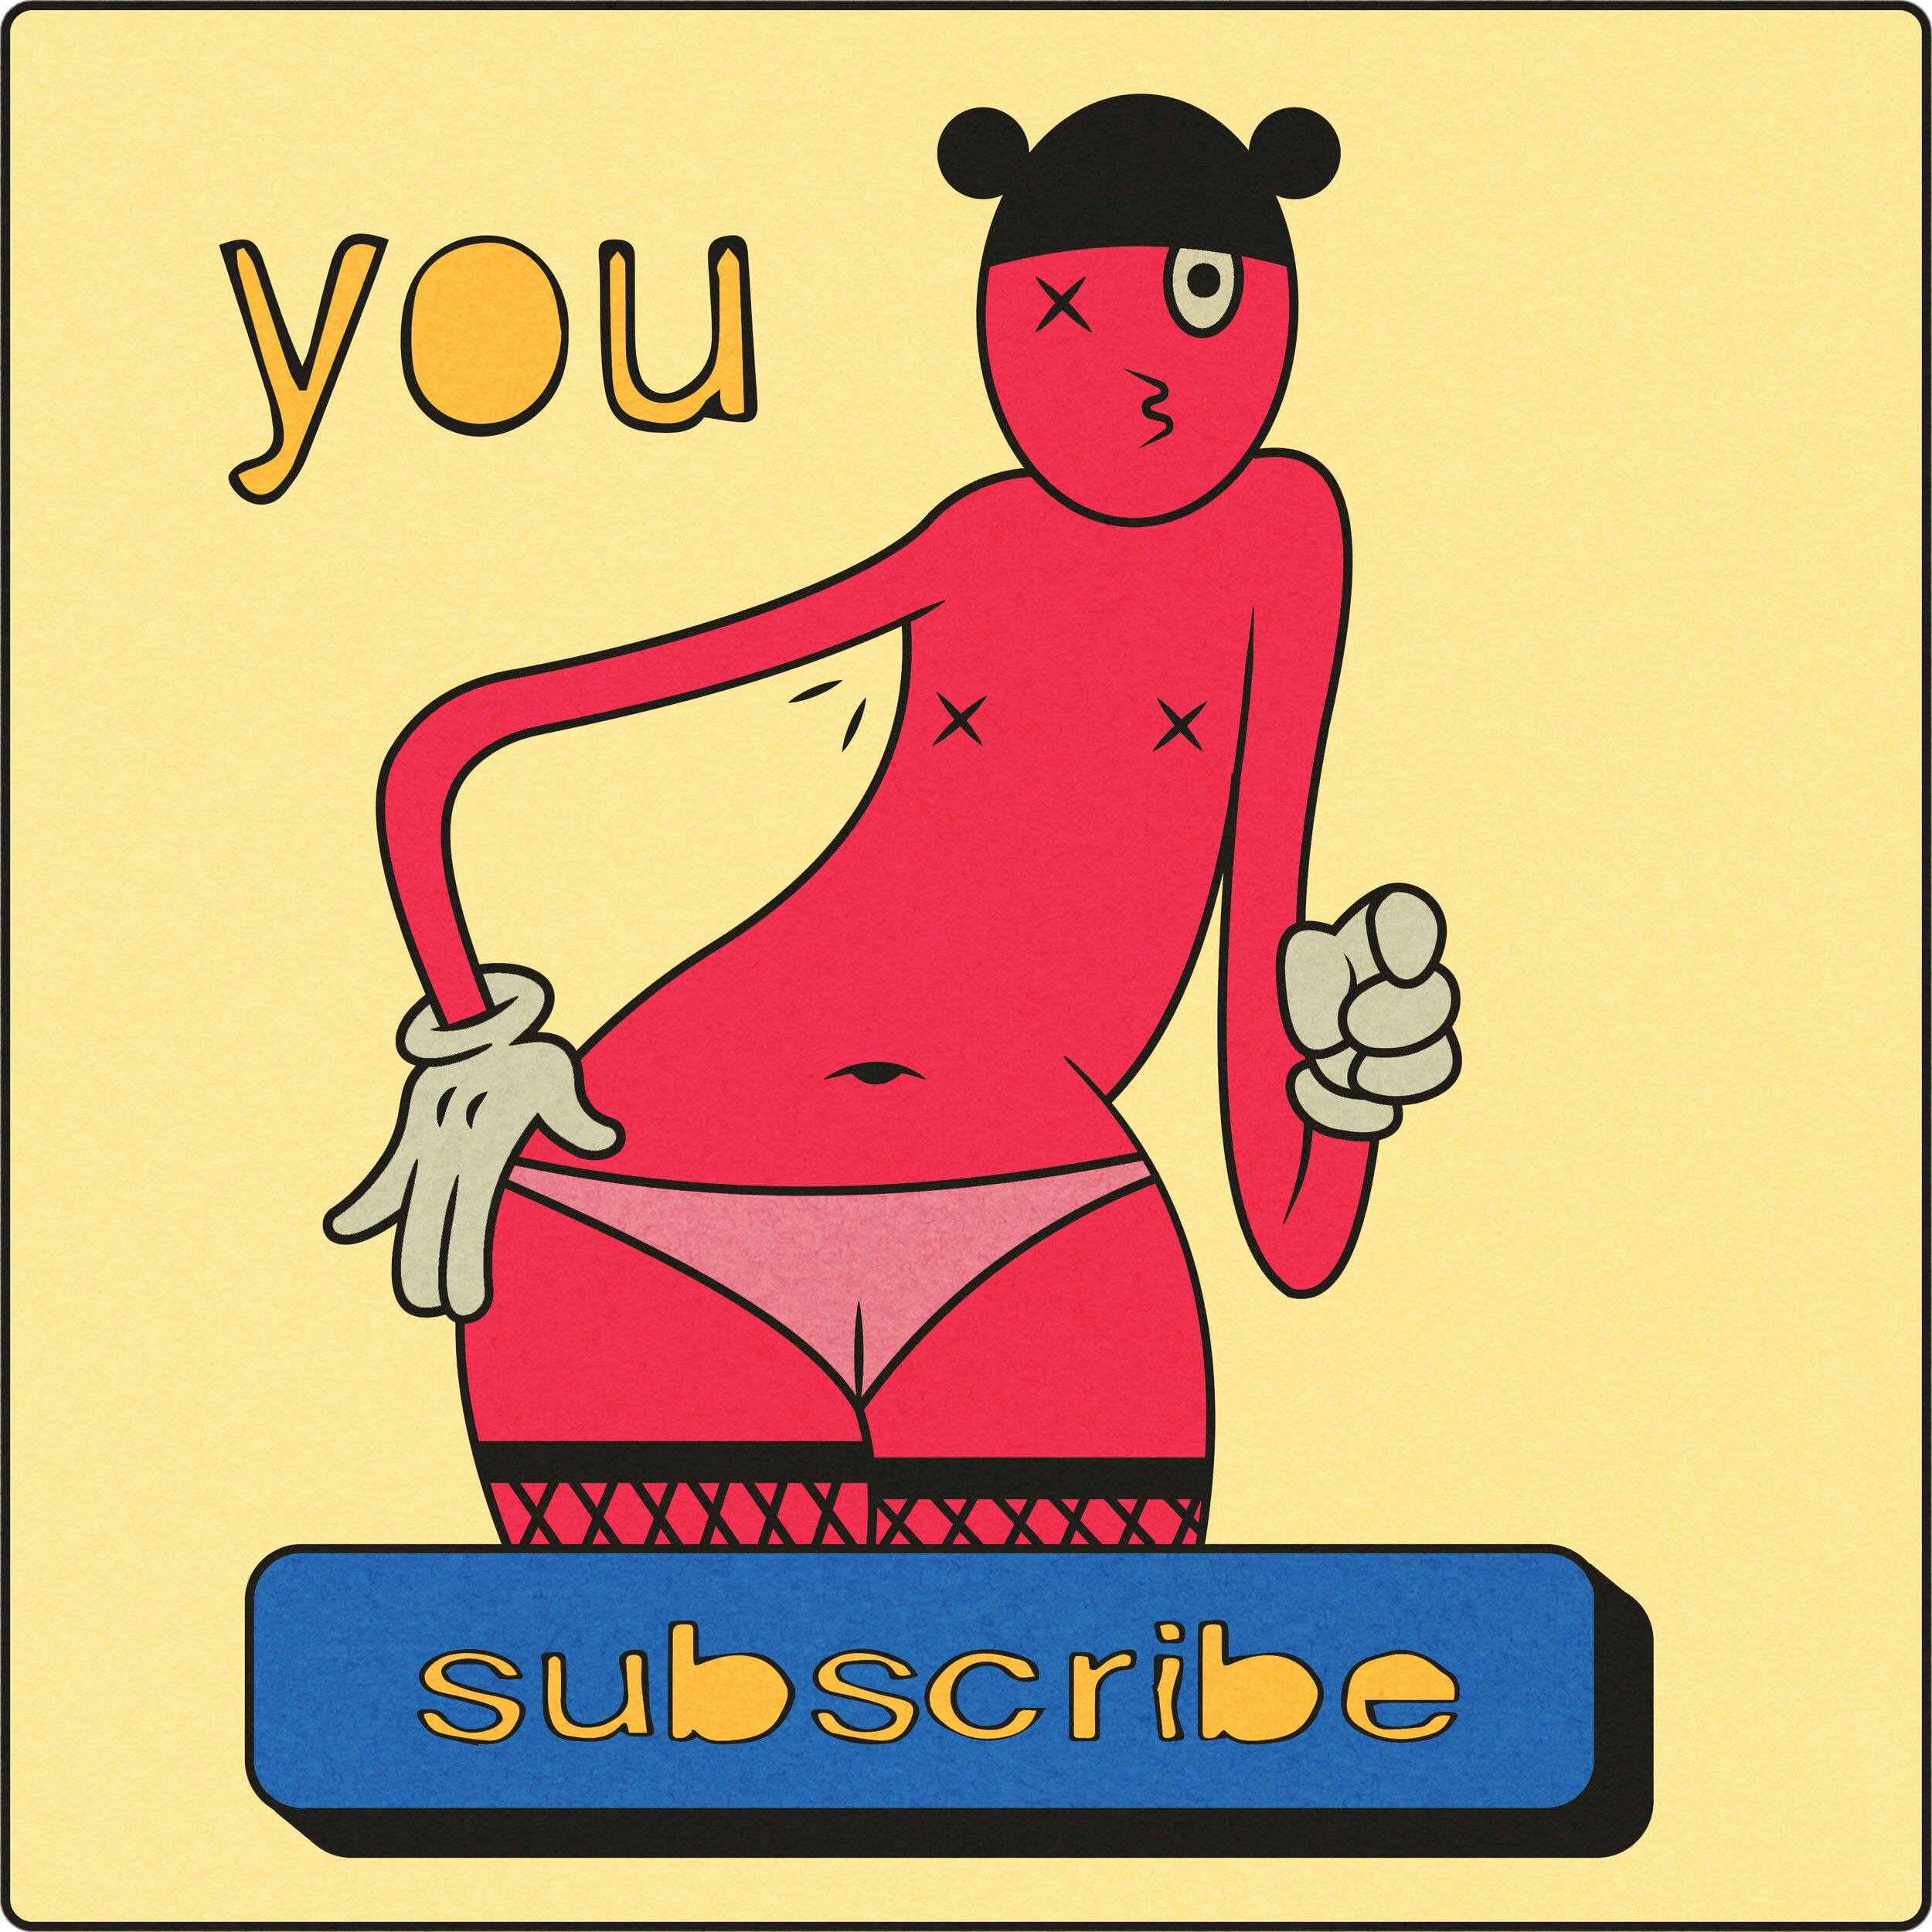 SUBSCRIBE - Don’t work for the NHS? Still want daily Nudes? Subscibe to our only fans account all the money we raise will go to grass roots charities supporting NHS workers.